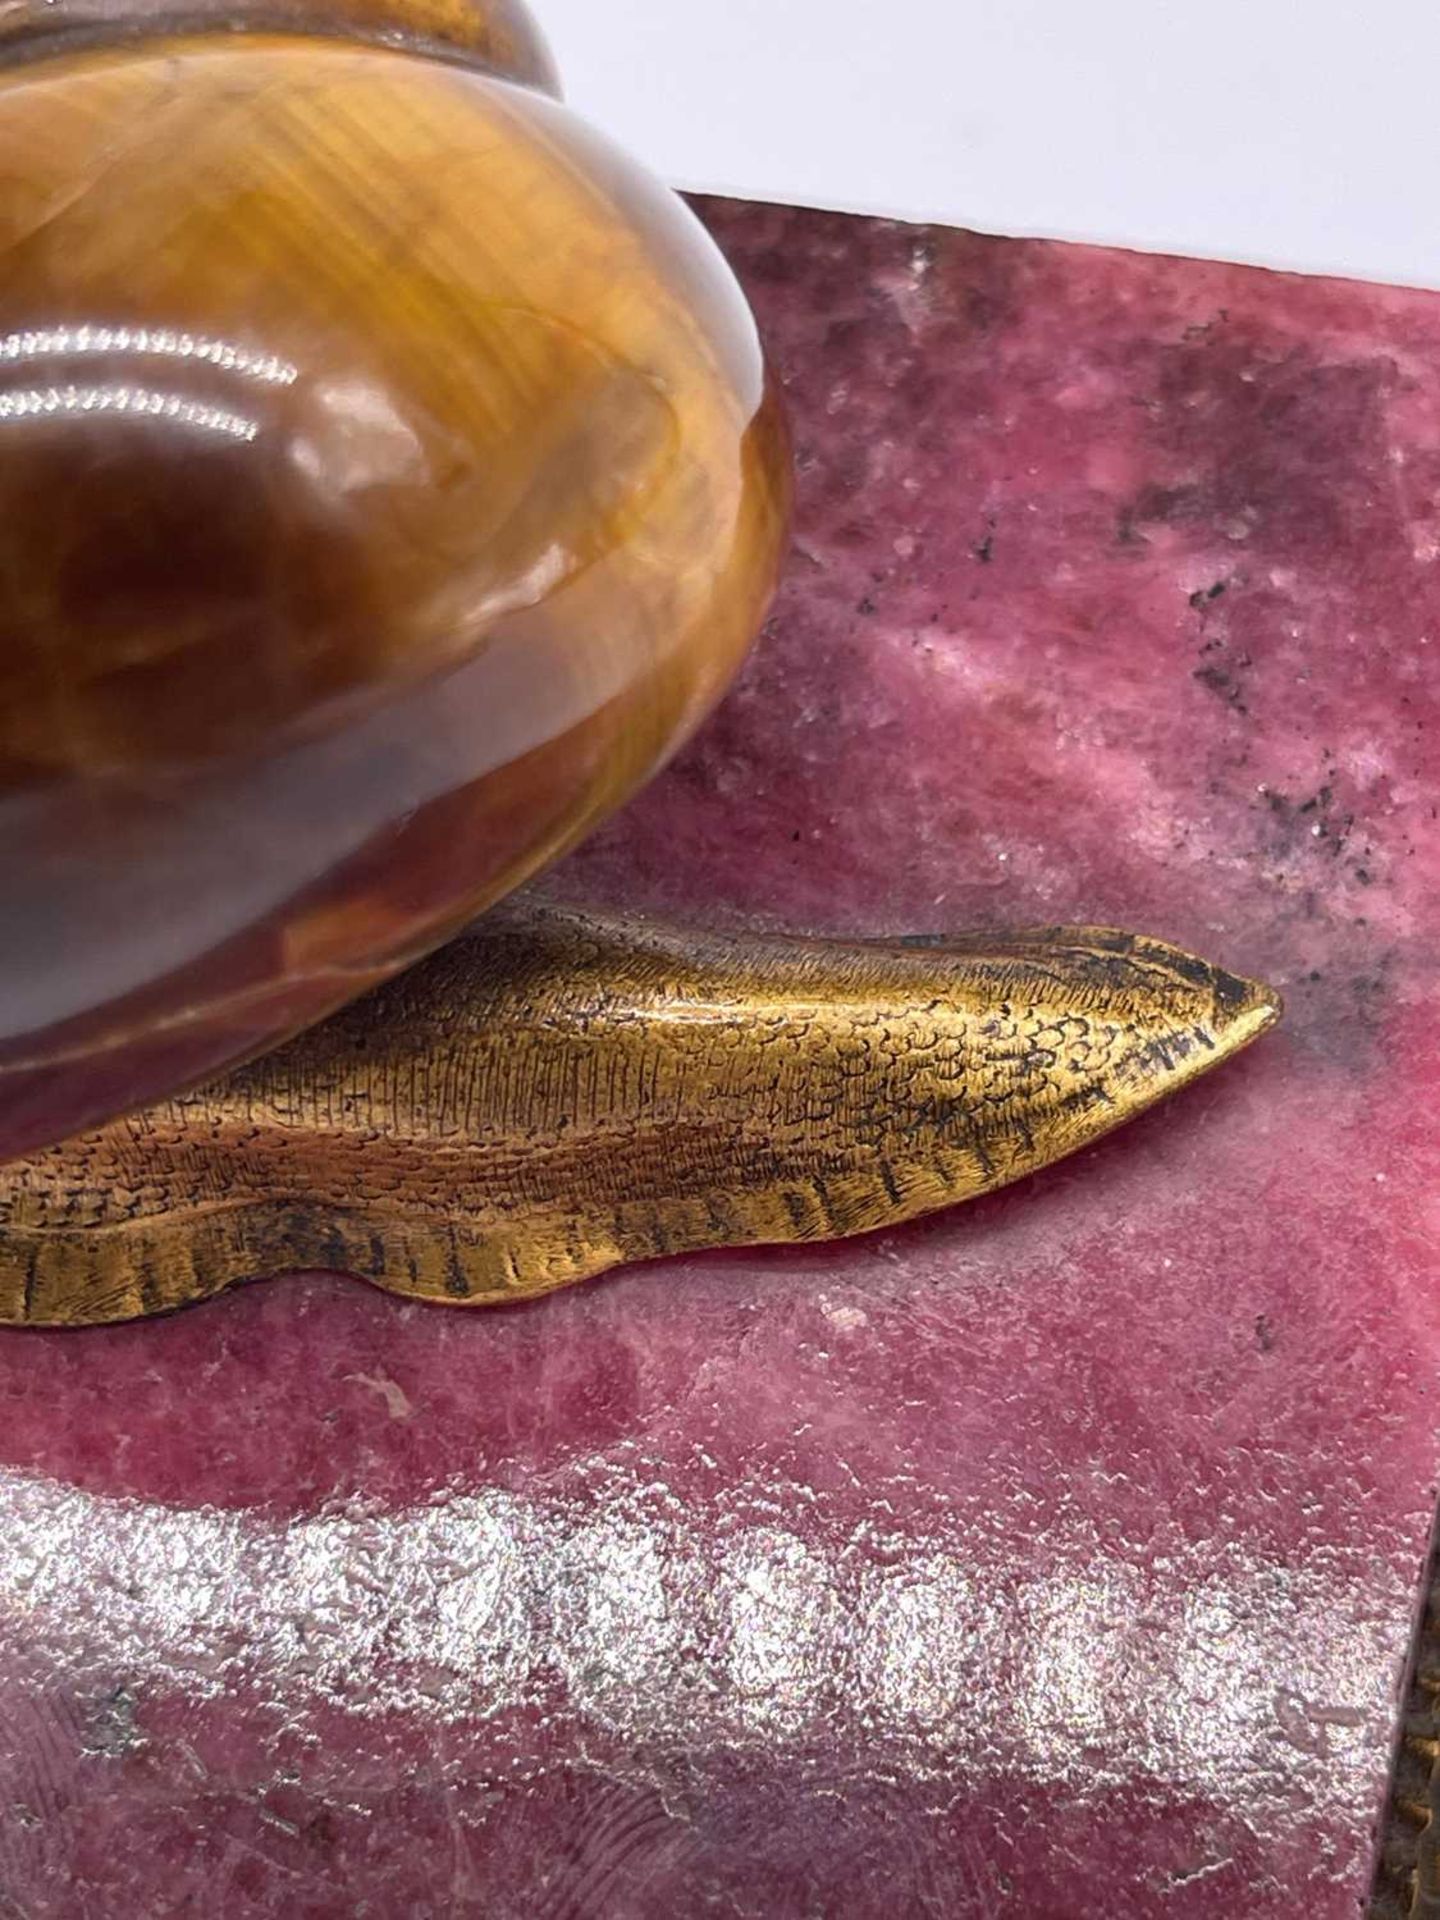 A tiger's eye and ormolu snail, - Image 19 of 25